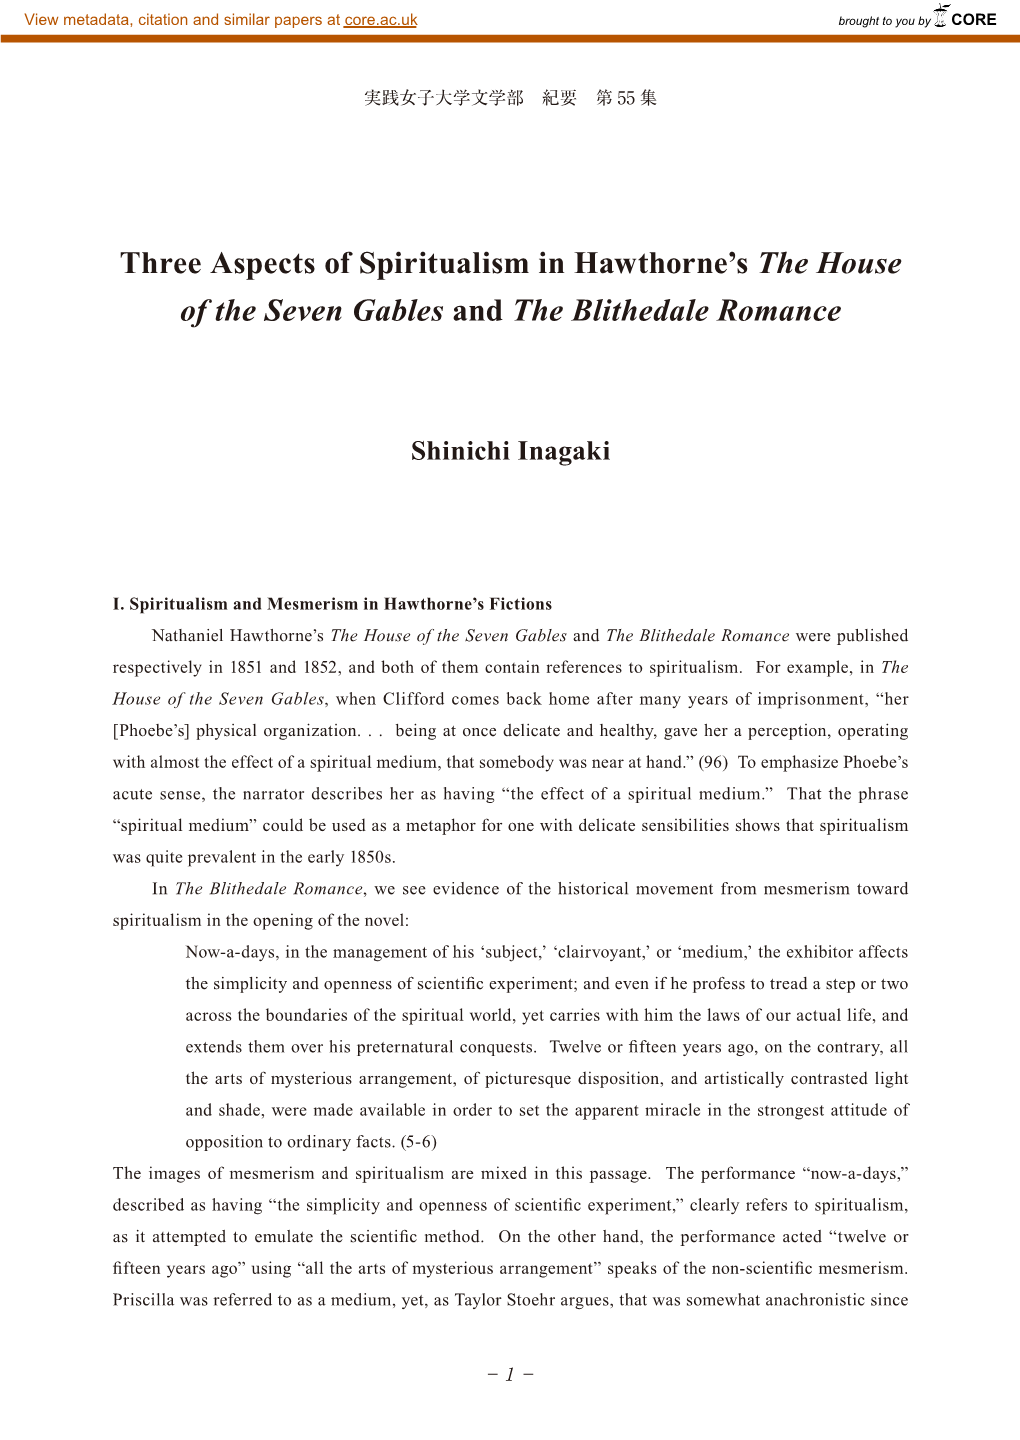 Three Aspects of Spiritualism in Hawthorne's the House of The